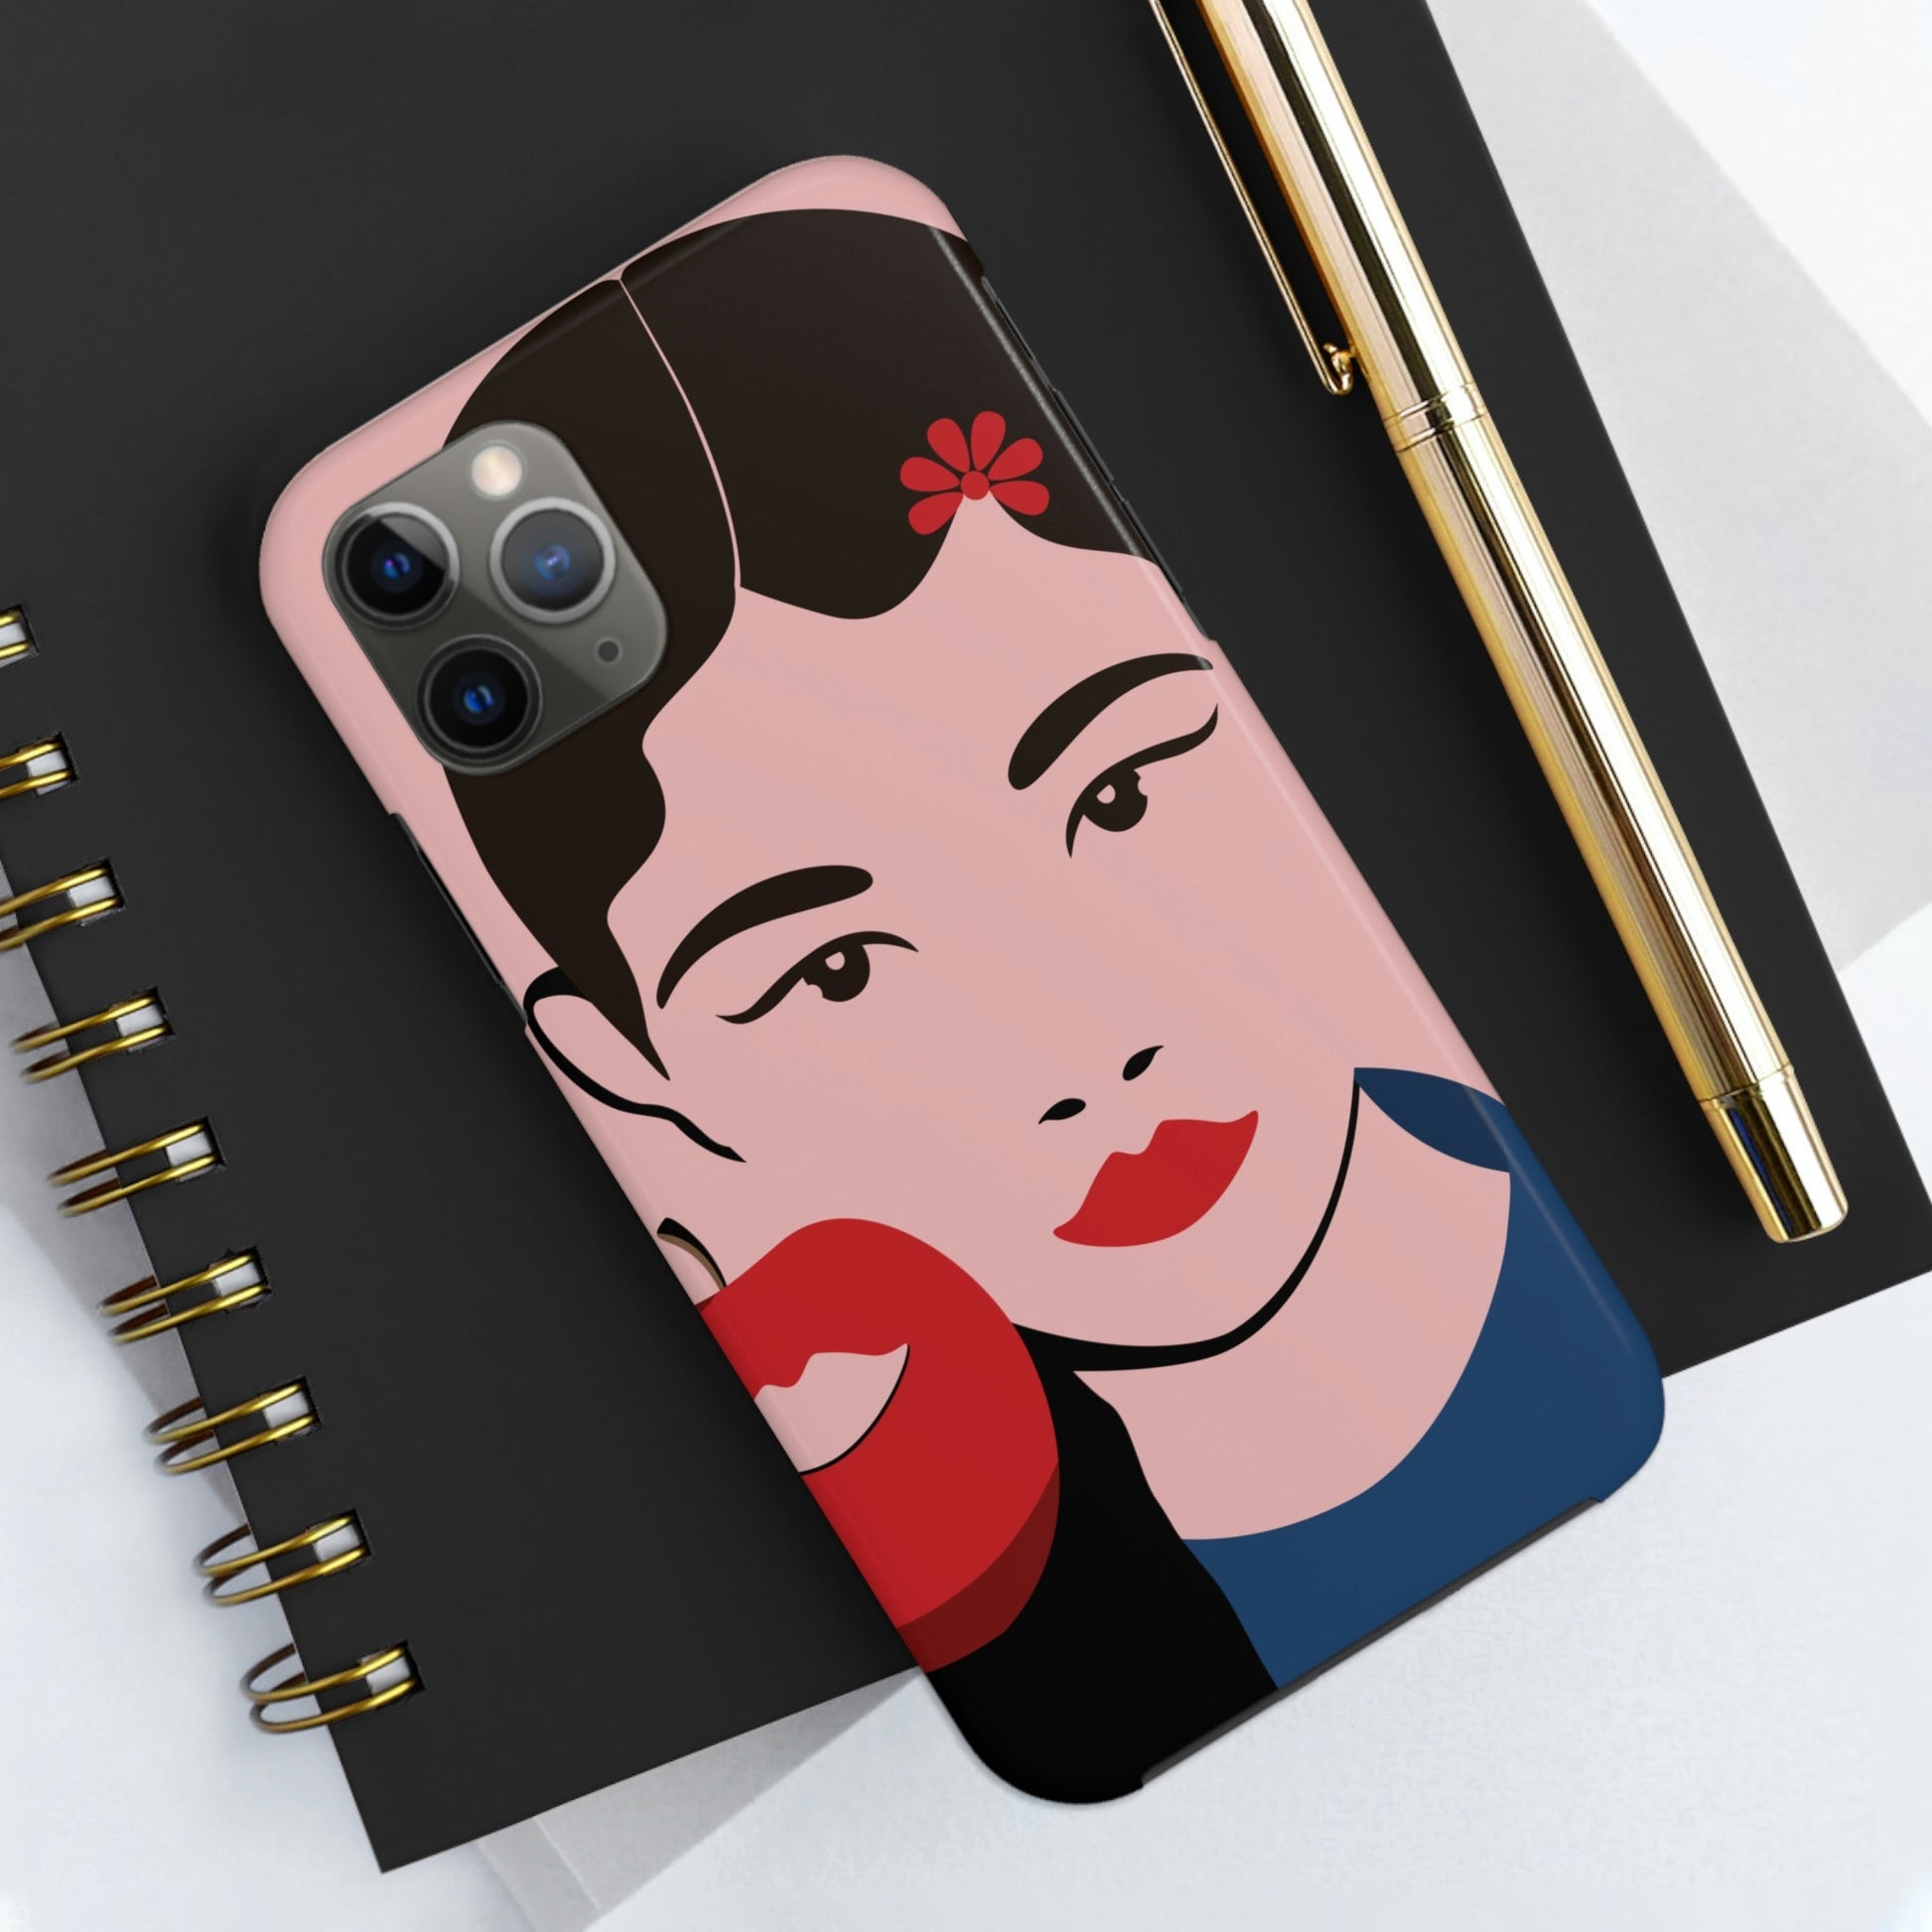 Japan Art Minimal Aesthetic Asian Woman Portrait Style Classic Tough Phone Cases Case-Mate Ichaku [Perfect Gifts Selection]